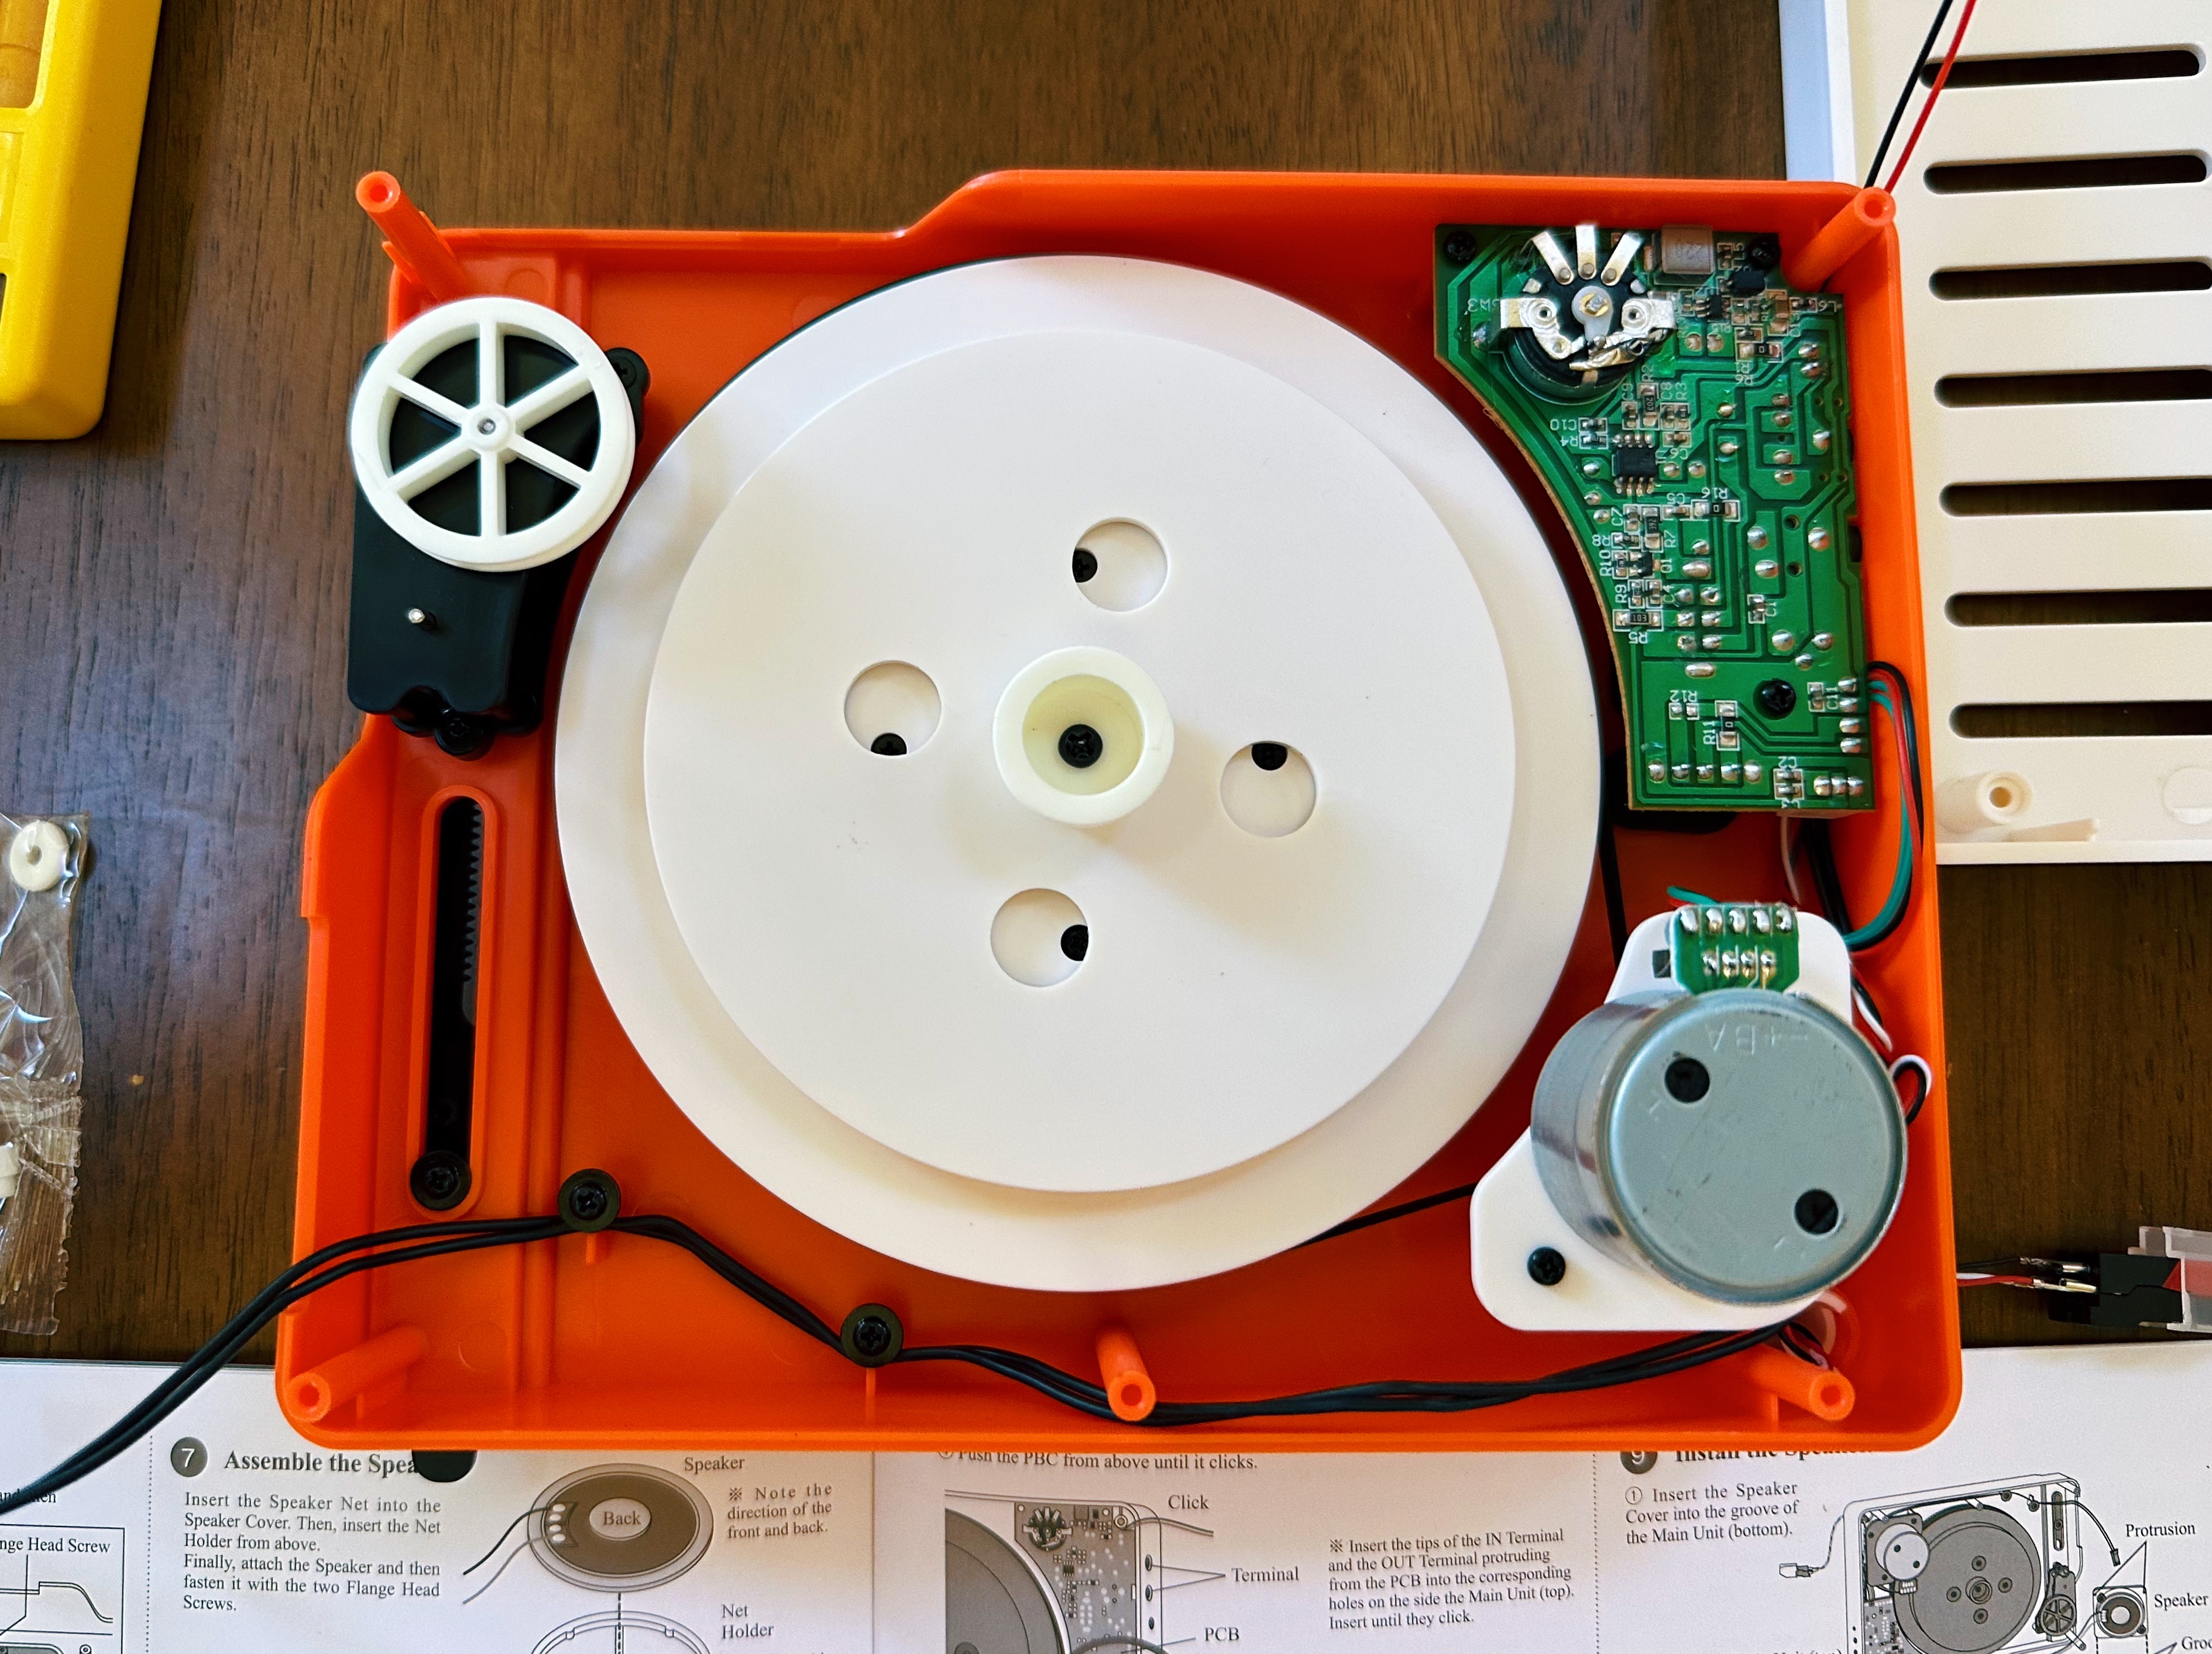 Hands-On: Making Vinyl Records With the PO-80 Record Factory